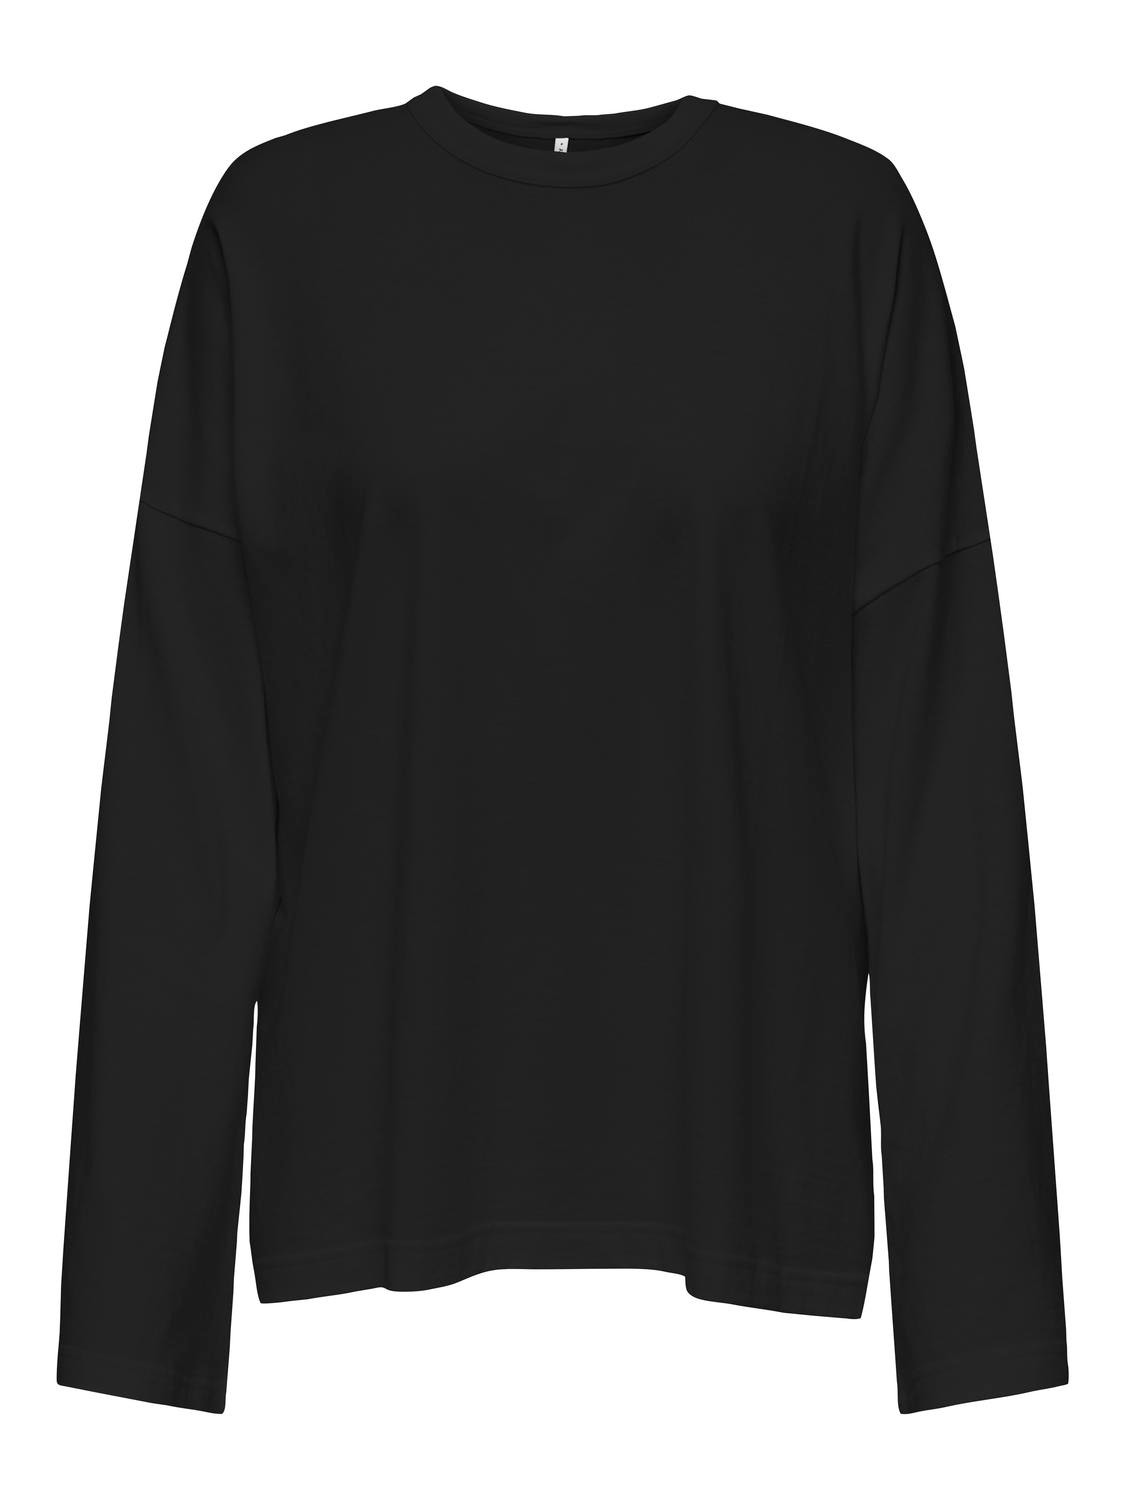 ONLY Regular Fit Round Neck Dropped shoulders Top -Black - 15321733